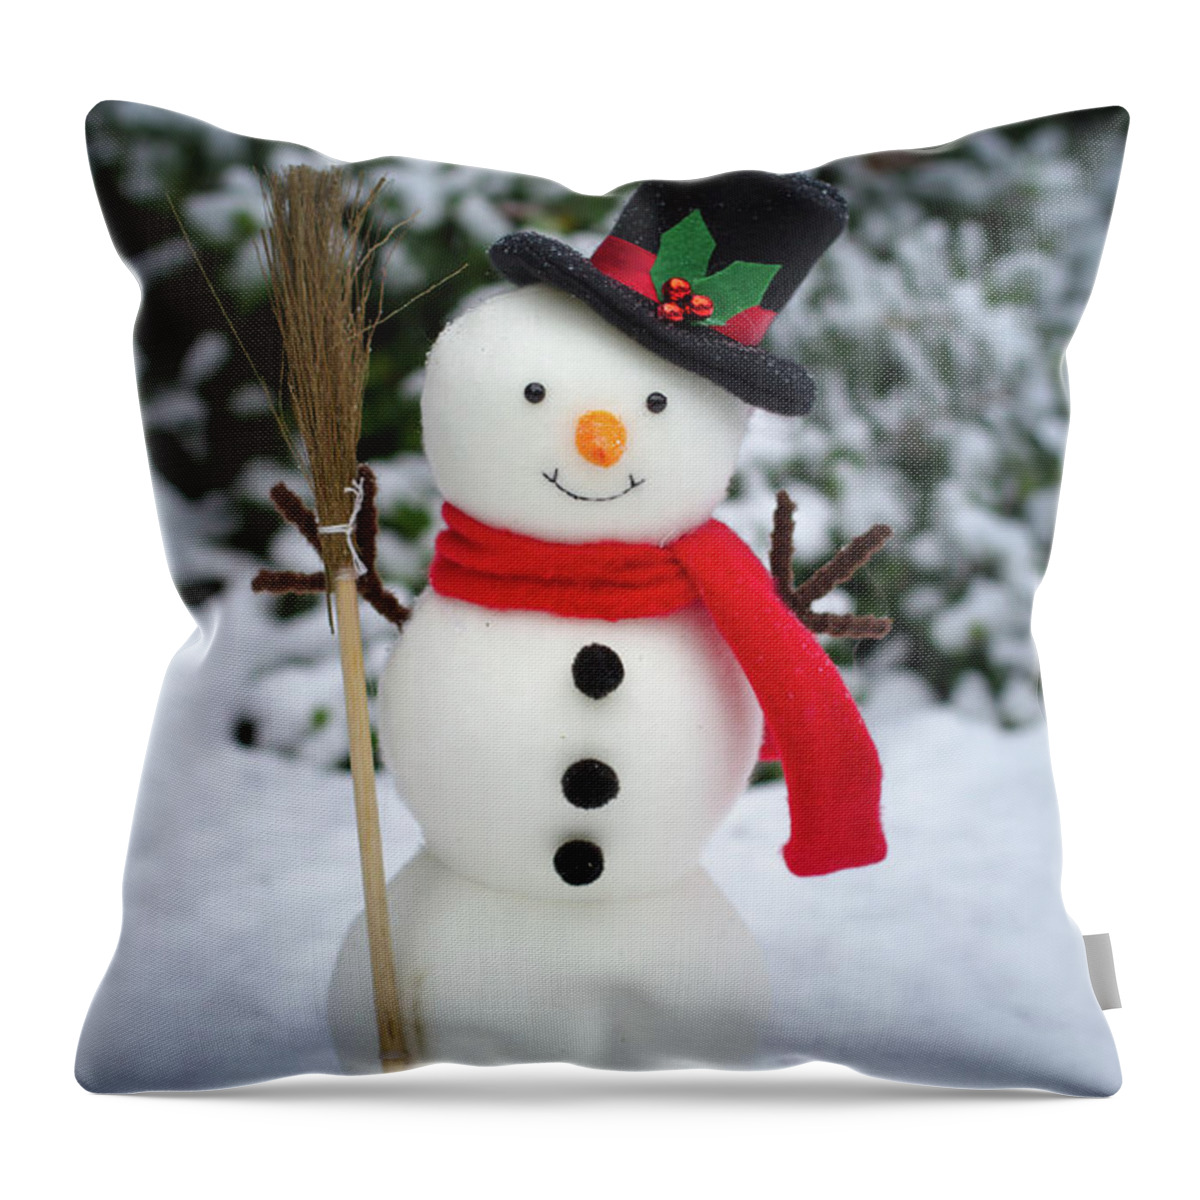 Broom Throw Pillow featuring the photograph The snowman on snowy ground by William Lee